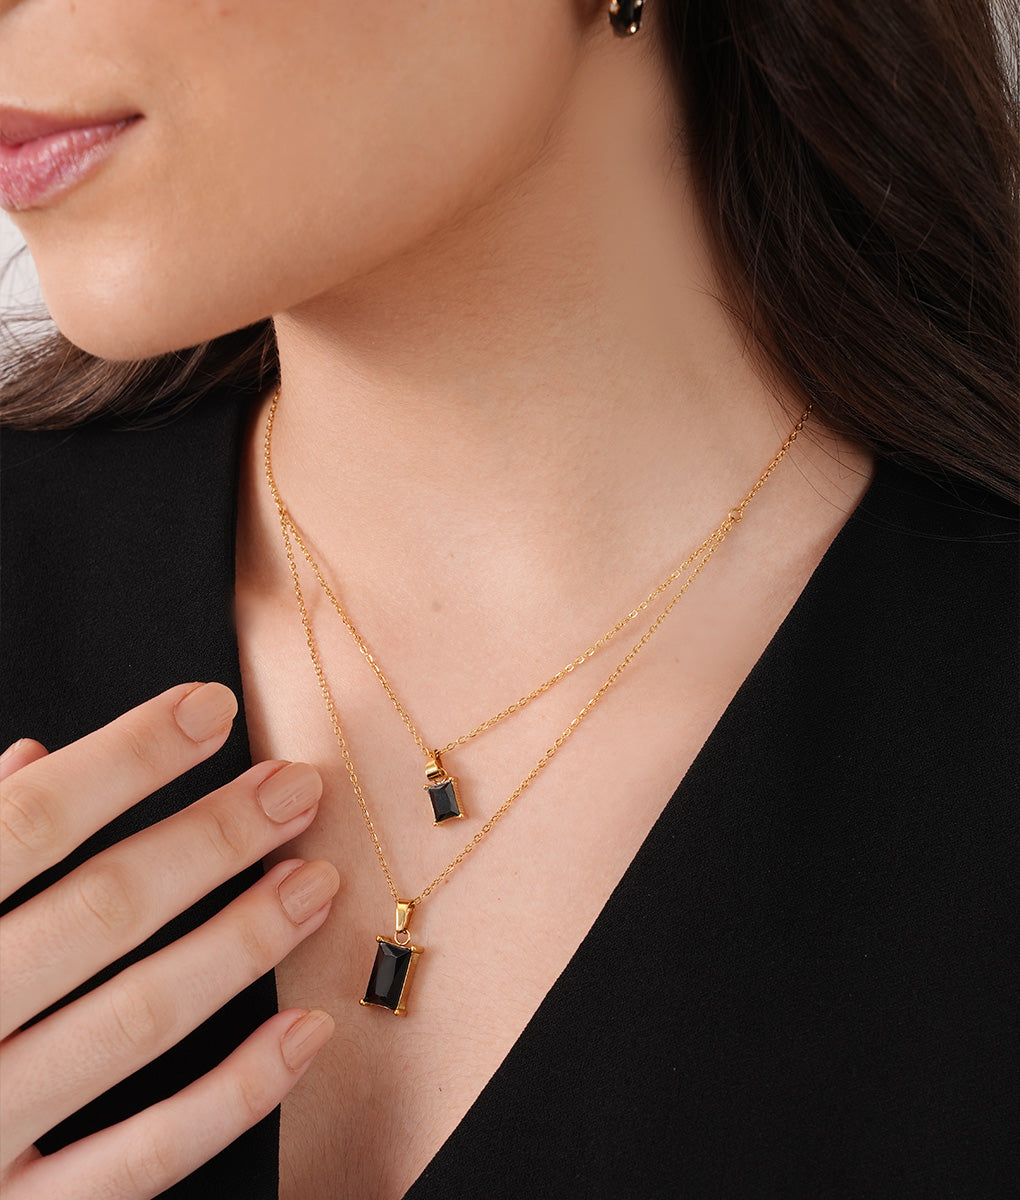 The Anatase Layered Necklace